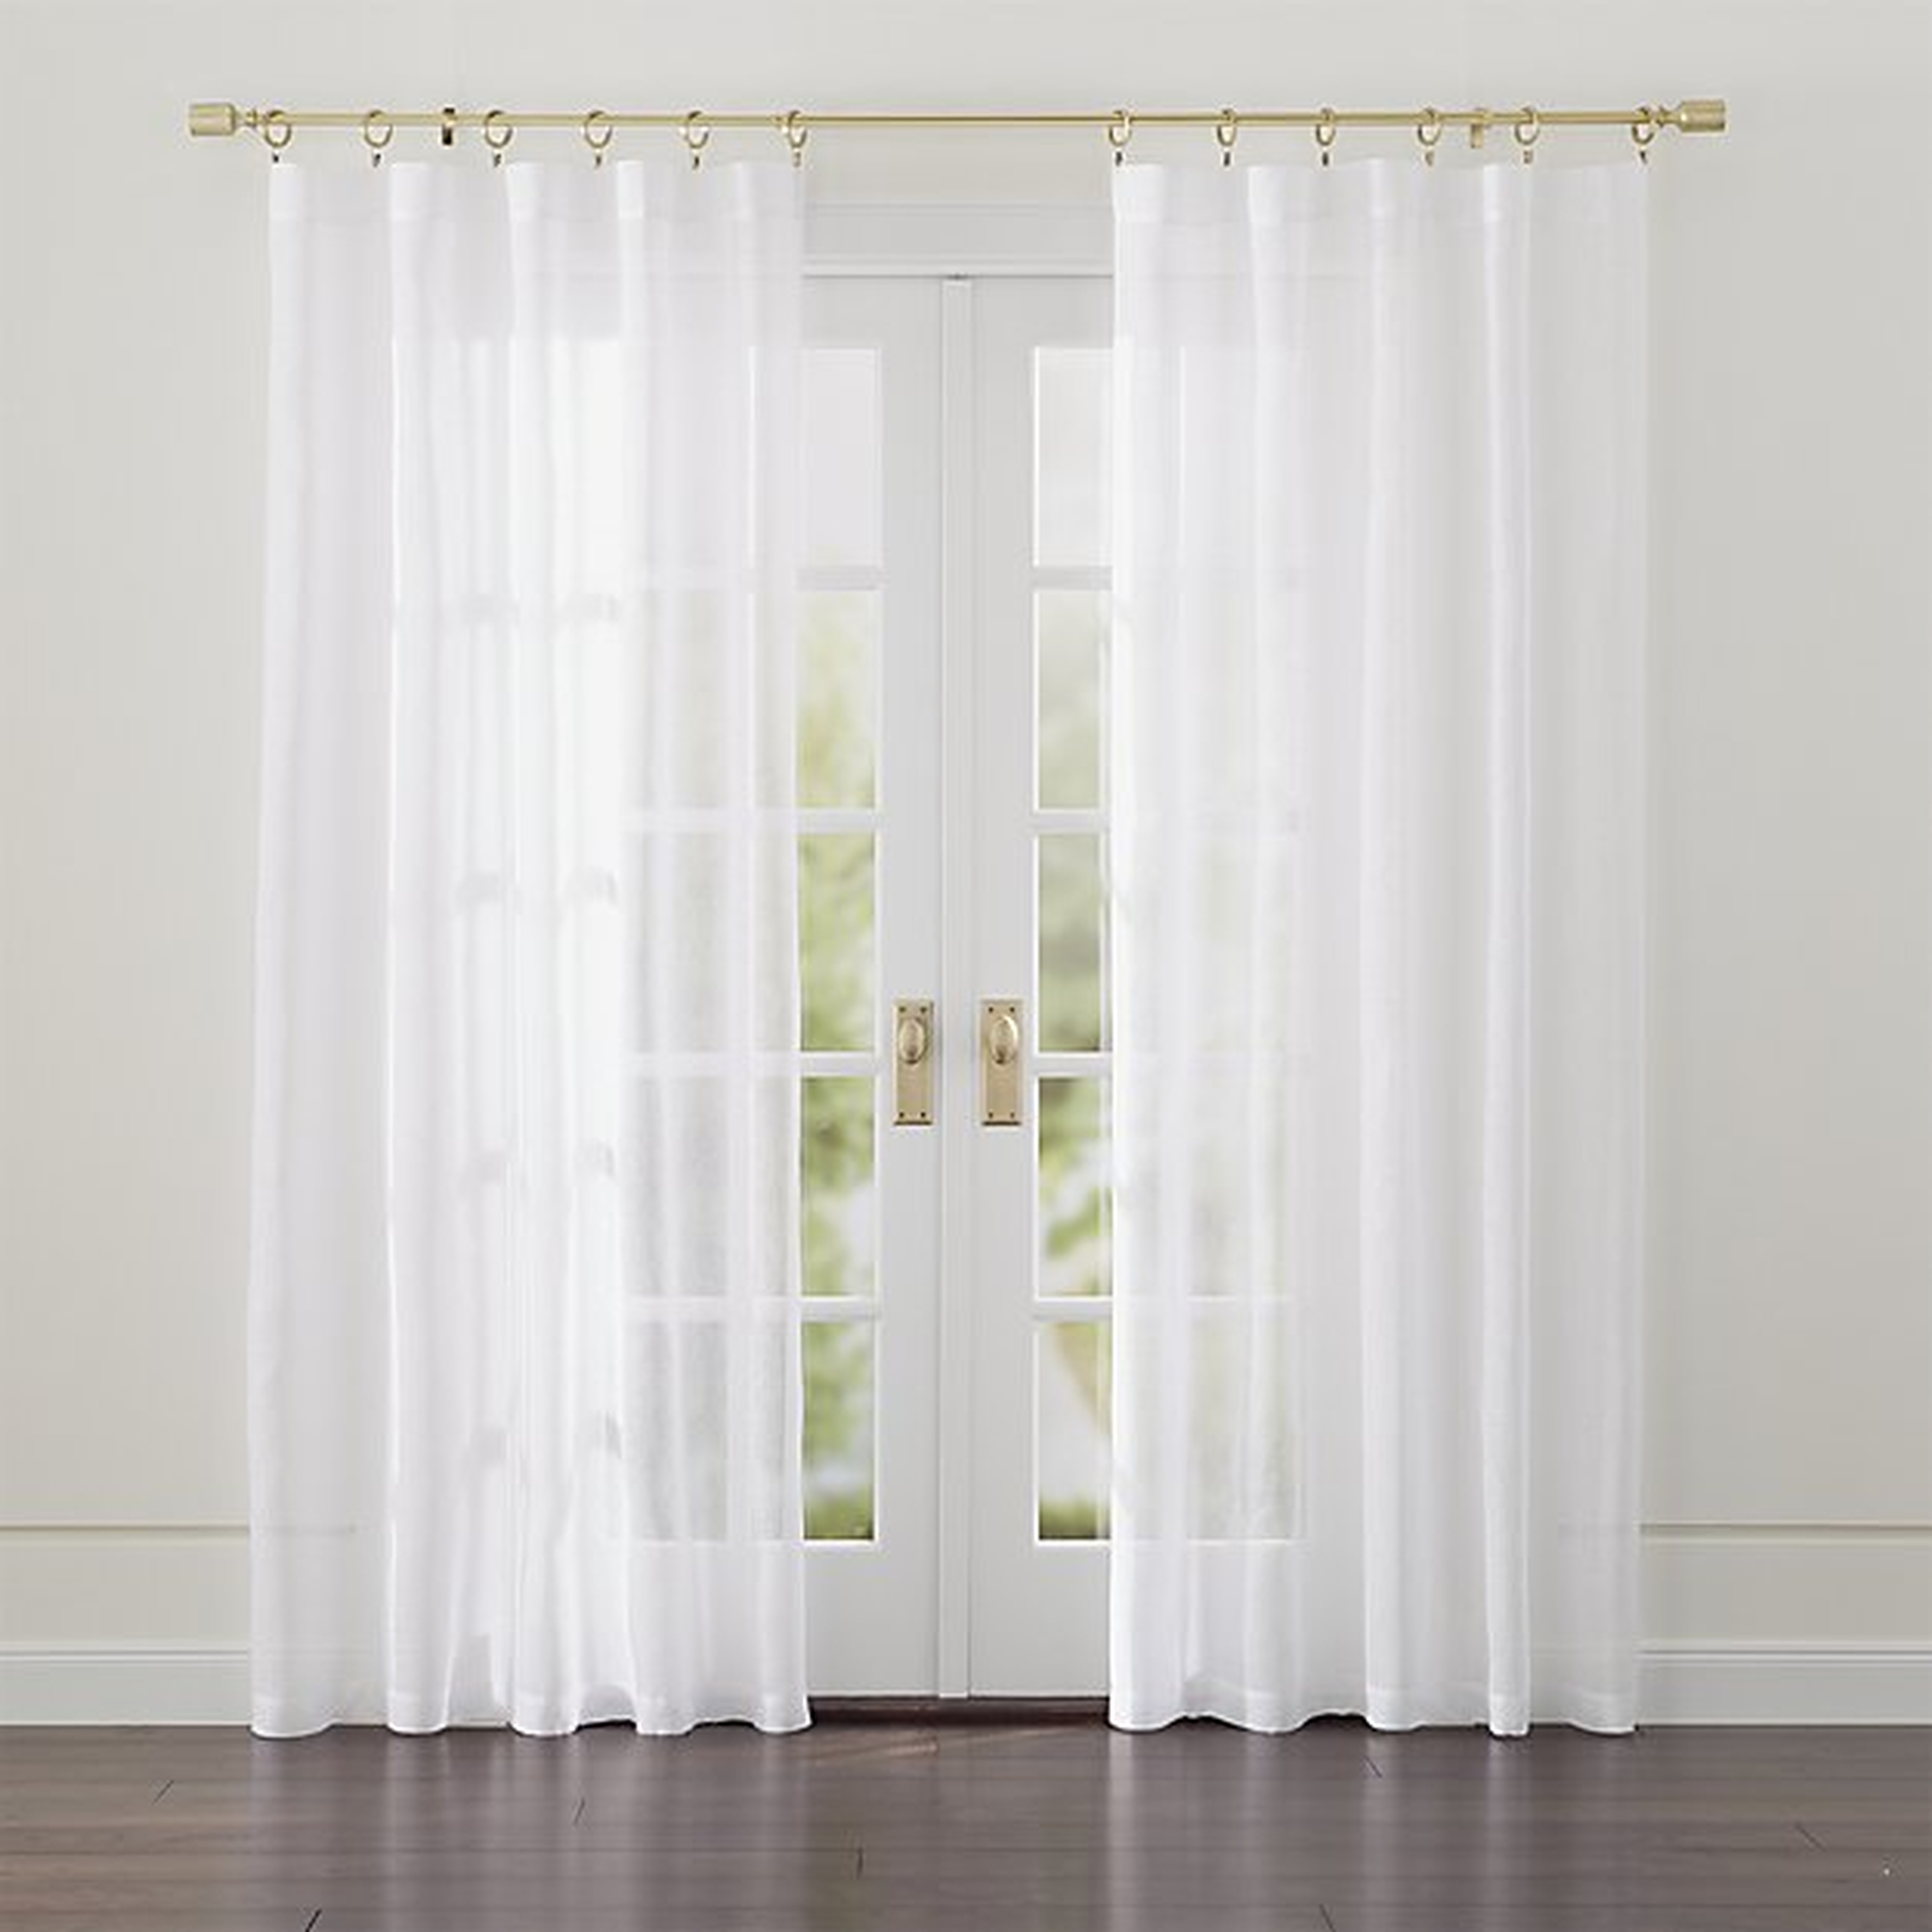 Linen Sheer 52"x108" Curtain Panel - Crate and Barrel